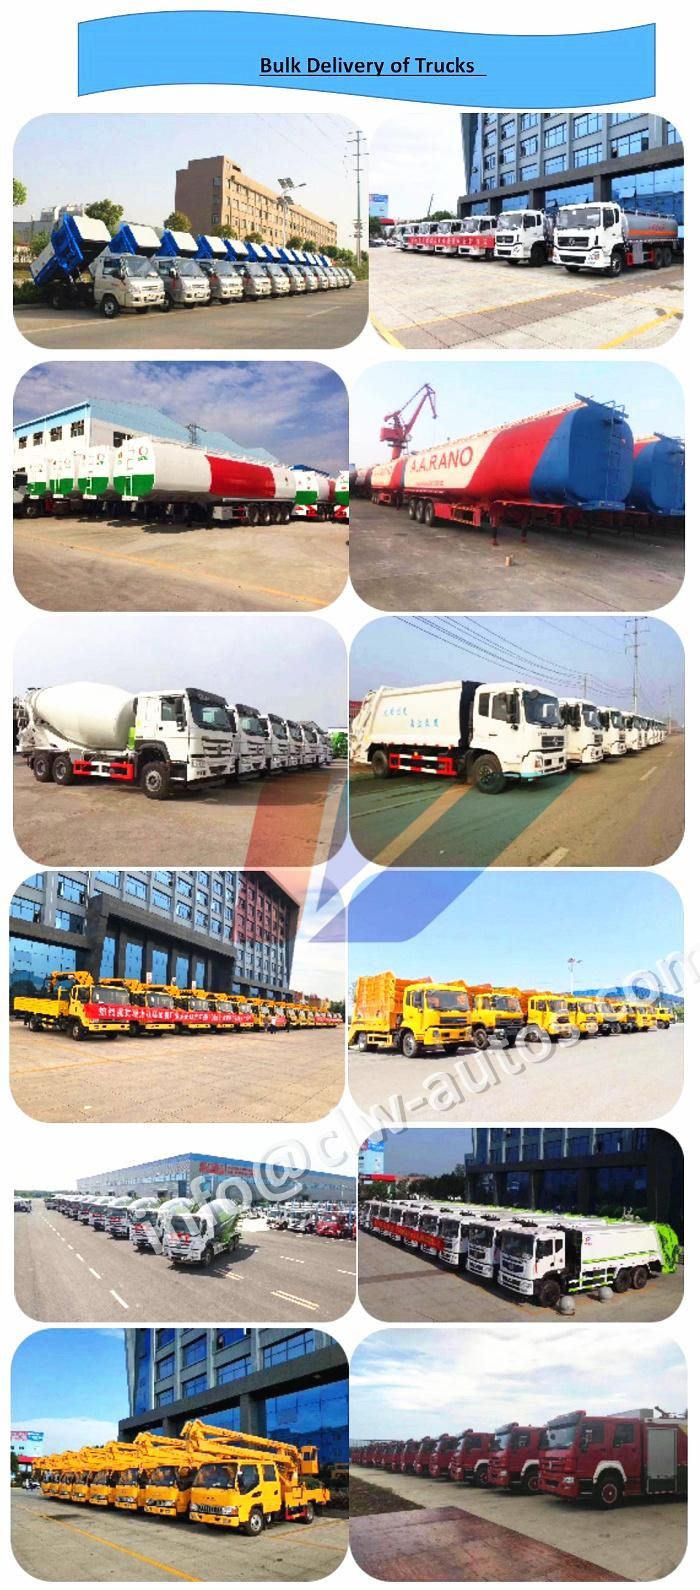 Dongfeng Hydraulic Dumping Arm Pulling Detachable Box 6ton 8ton Hook Lift Garbage Truck for Daily Refuse or Construction Garbage Delivery